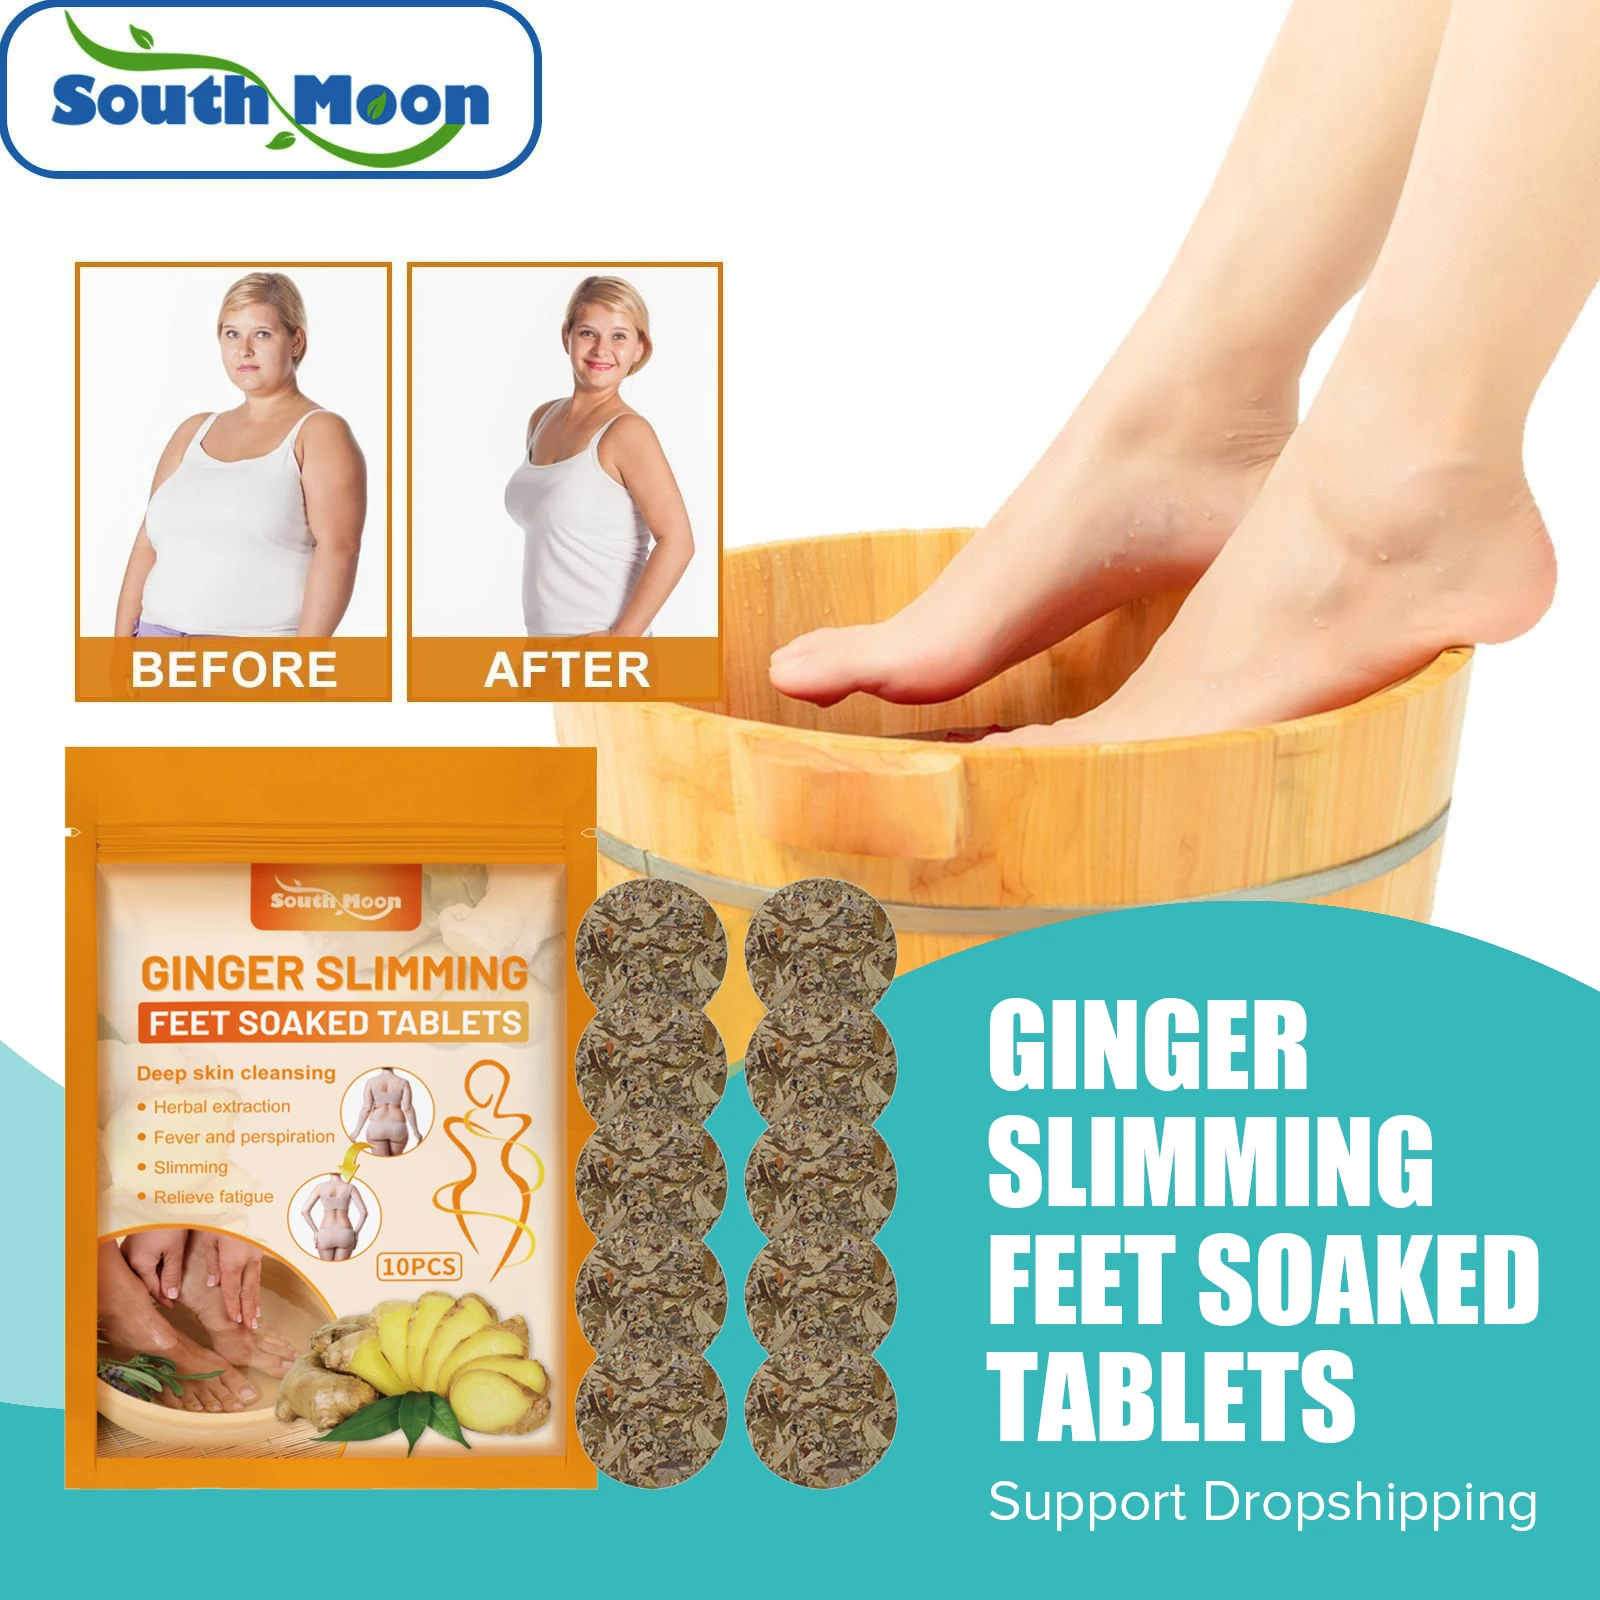 

South Moon Foot Soak Tablets Ginger Slimming Products Lose Weight Fat Burning Spa Sweat Detox Relax Body Sculpting Health Care